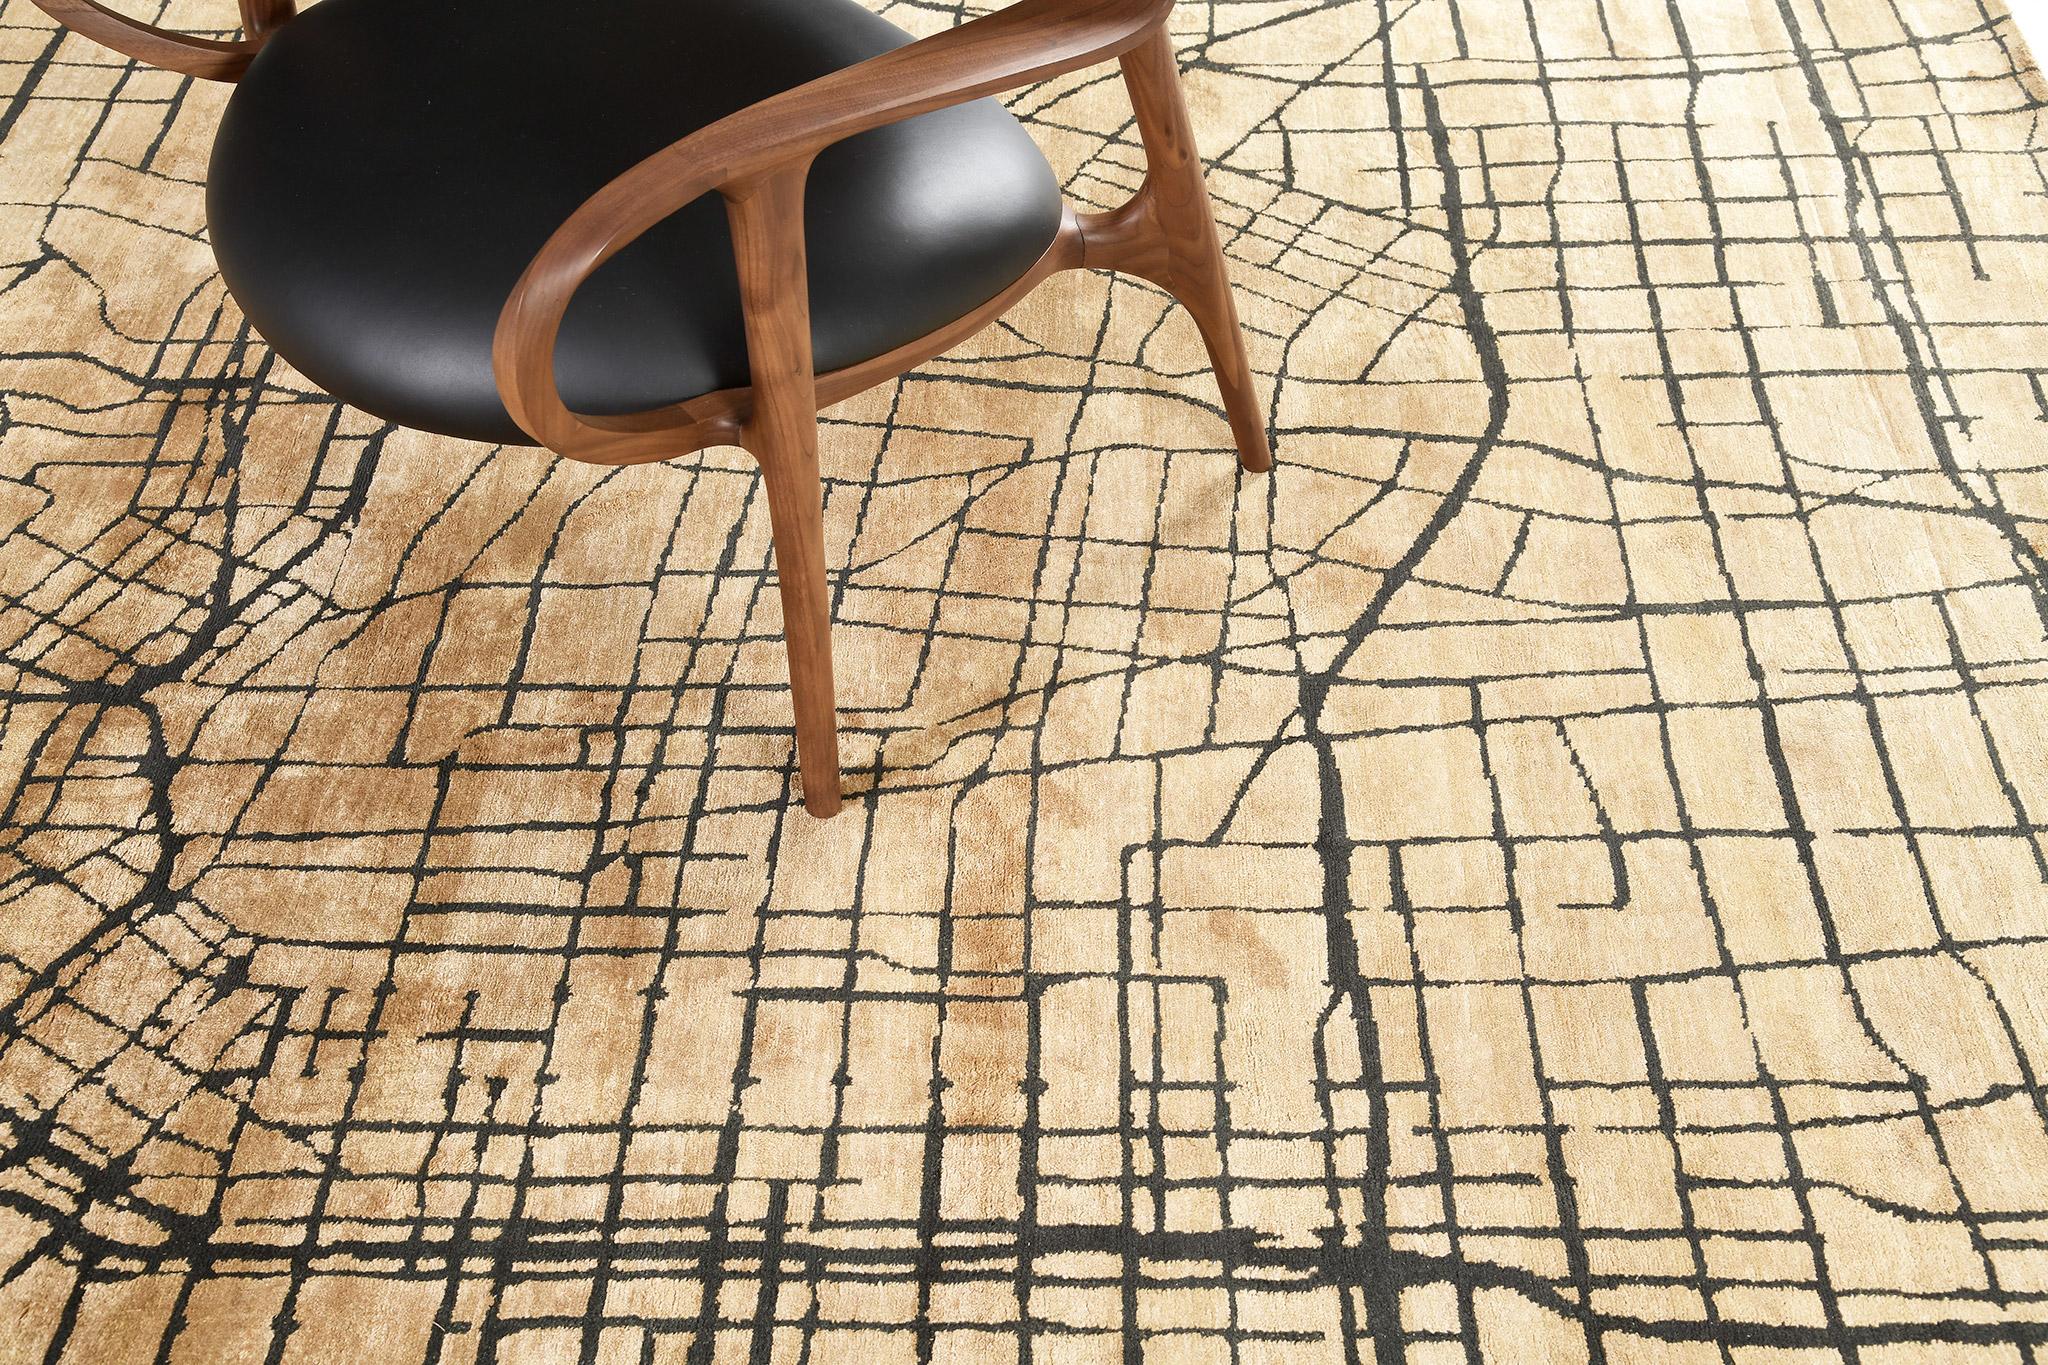 Mason is an homage to Erica's L.A. roots. The rug takes the bird's eye (or private plane) view of the urban landscape into a wool field of gold traced with black, cream traced with silver, with other colorways available including dark charcoal